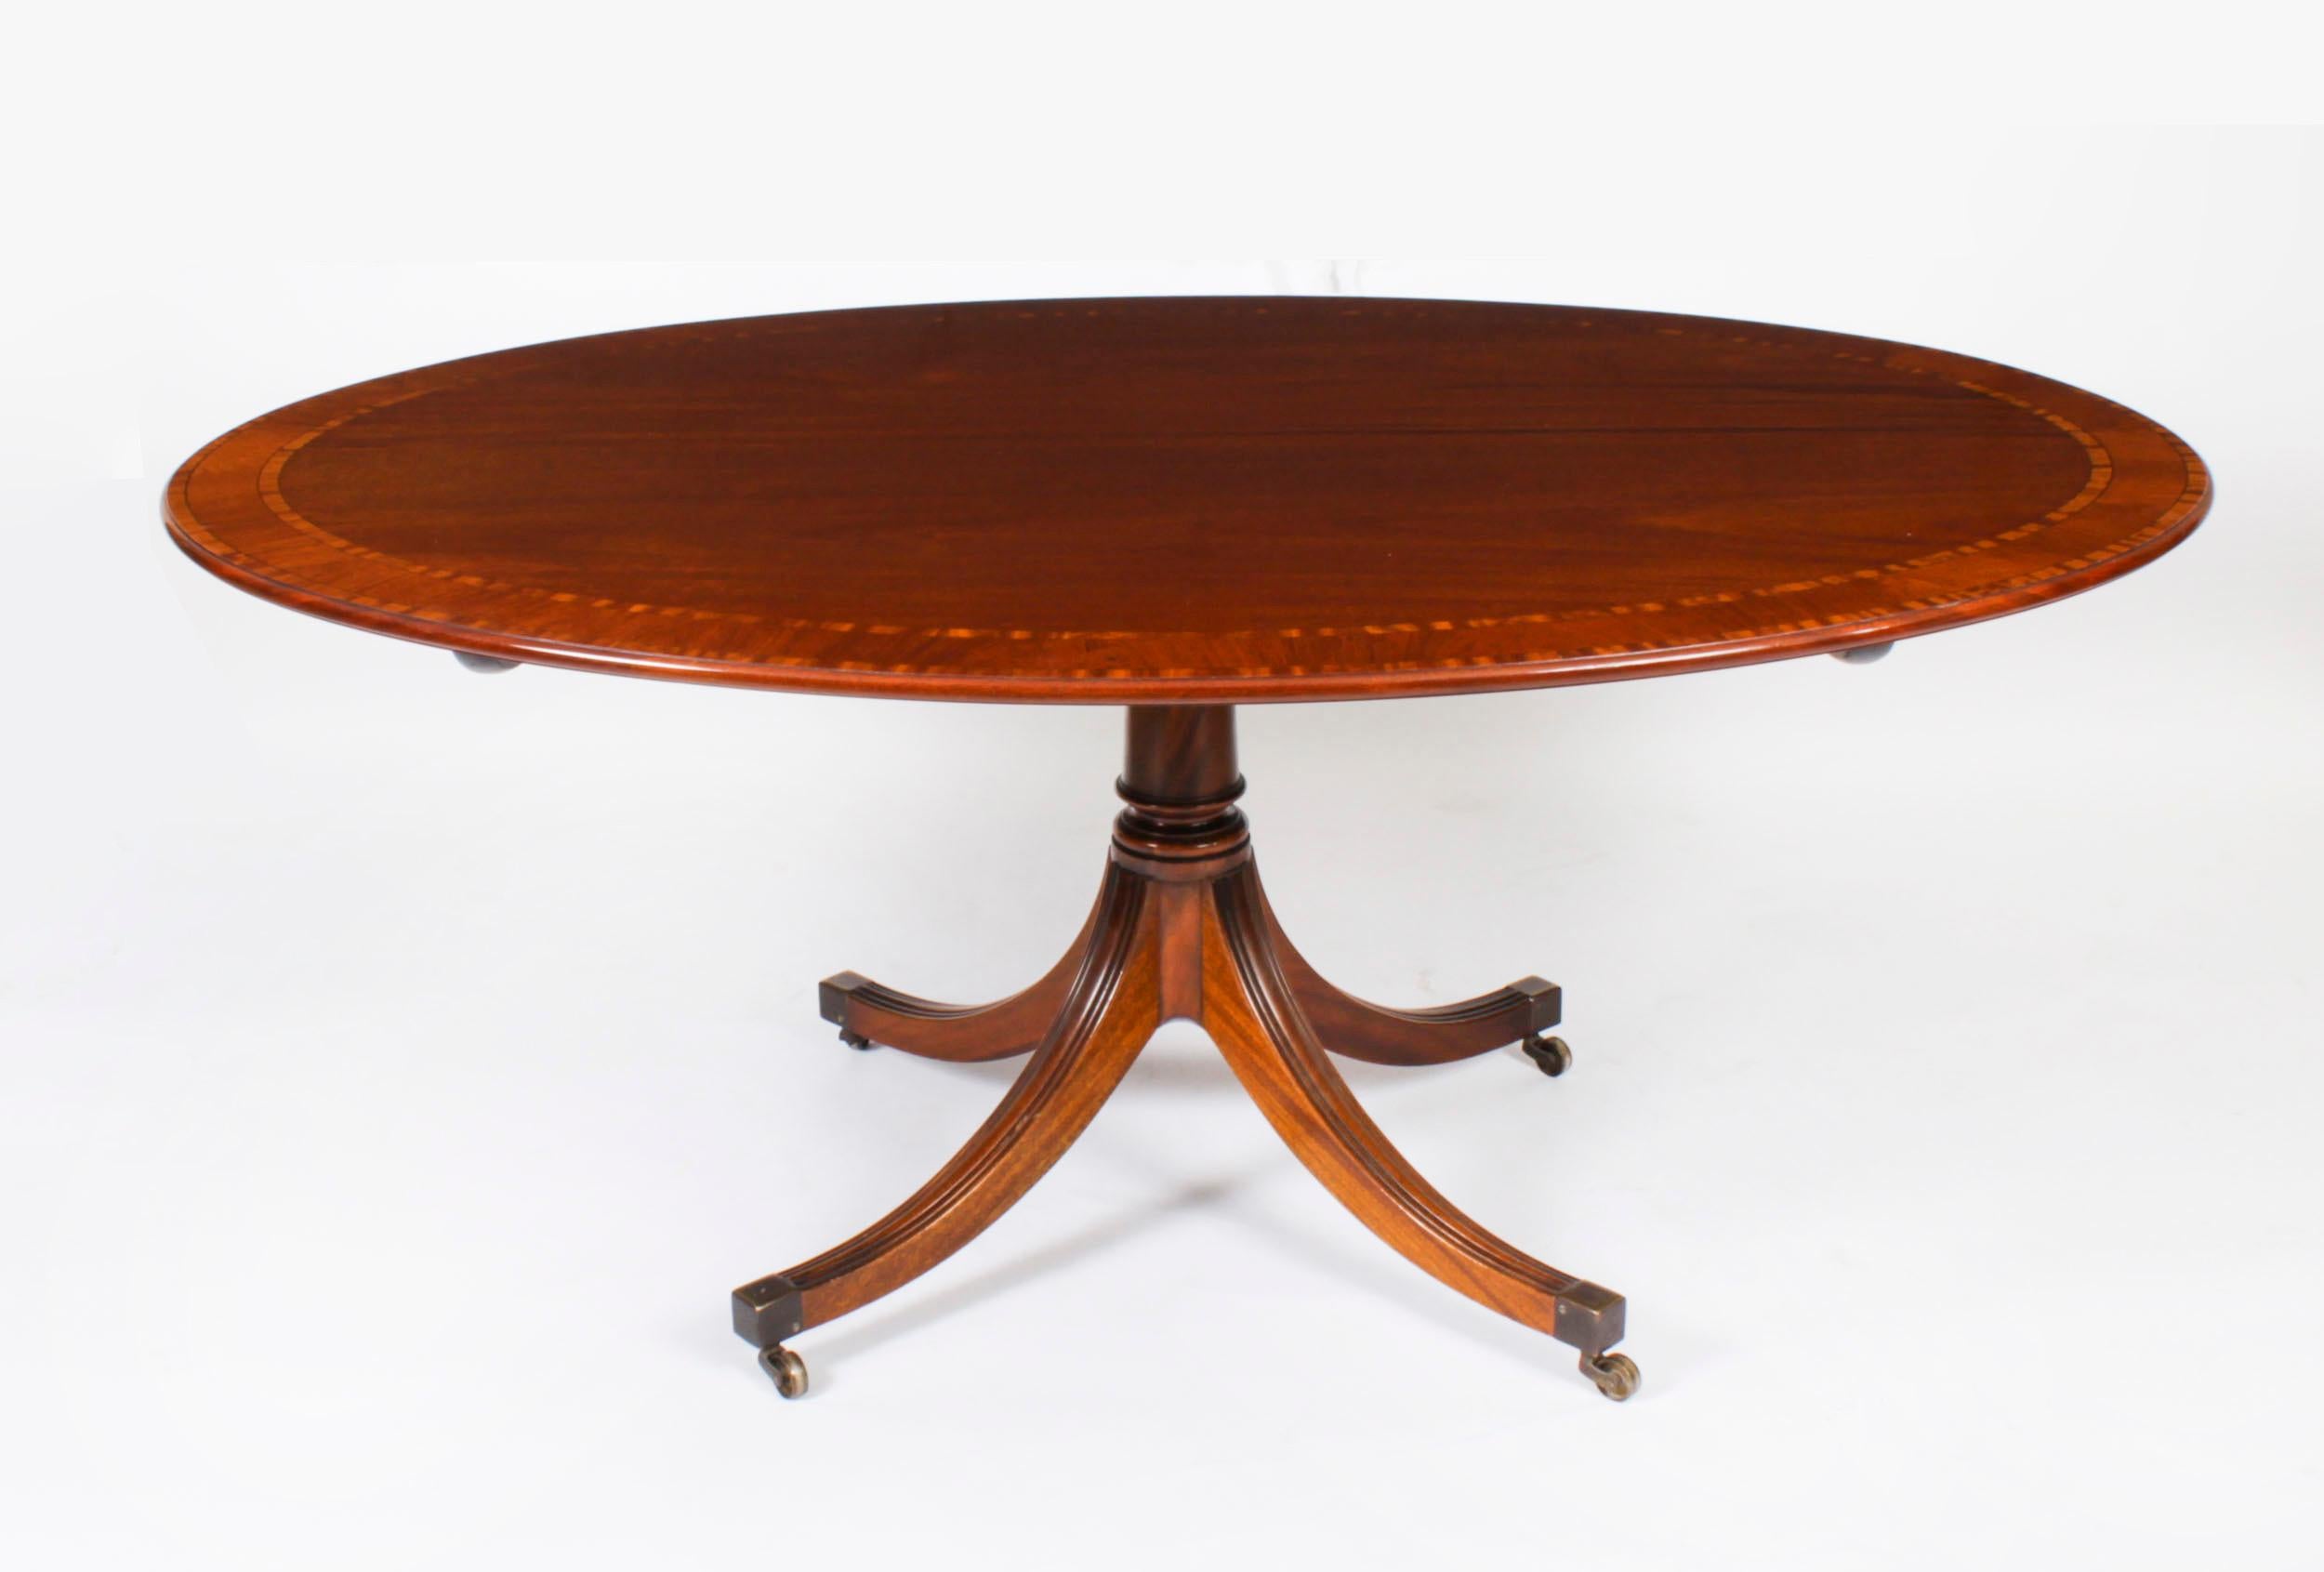 This is a beautiful Regency Revival flame mahogany and satinwood banded oval dining table  dating from Circa 1980 made by the Master Cabinet maker William Tillman and bearing his label on the underside.

The fabulous 5ft 6inch flame mahogany tilt